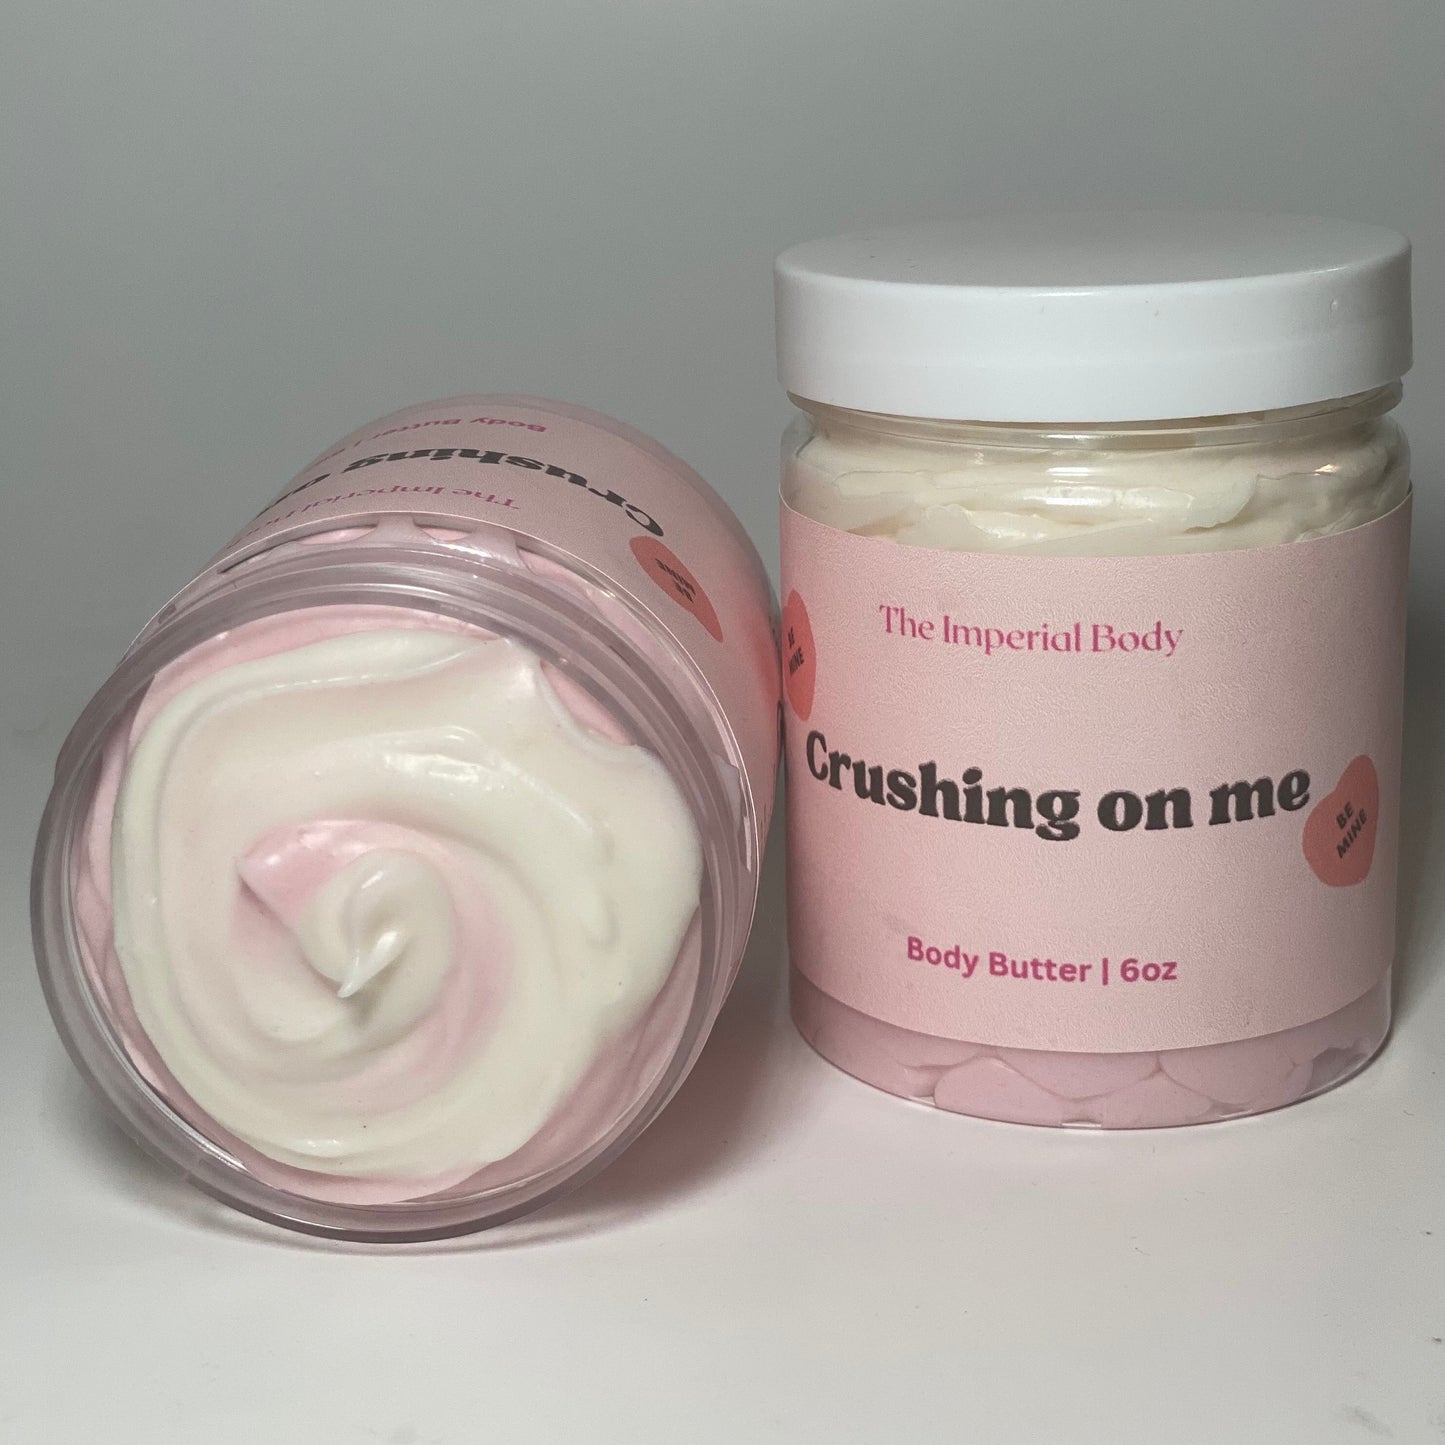 Crushing on me Body Butter